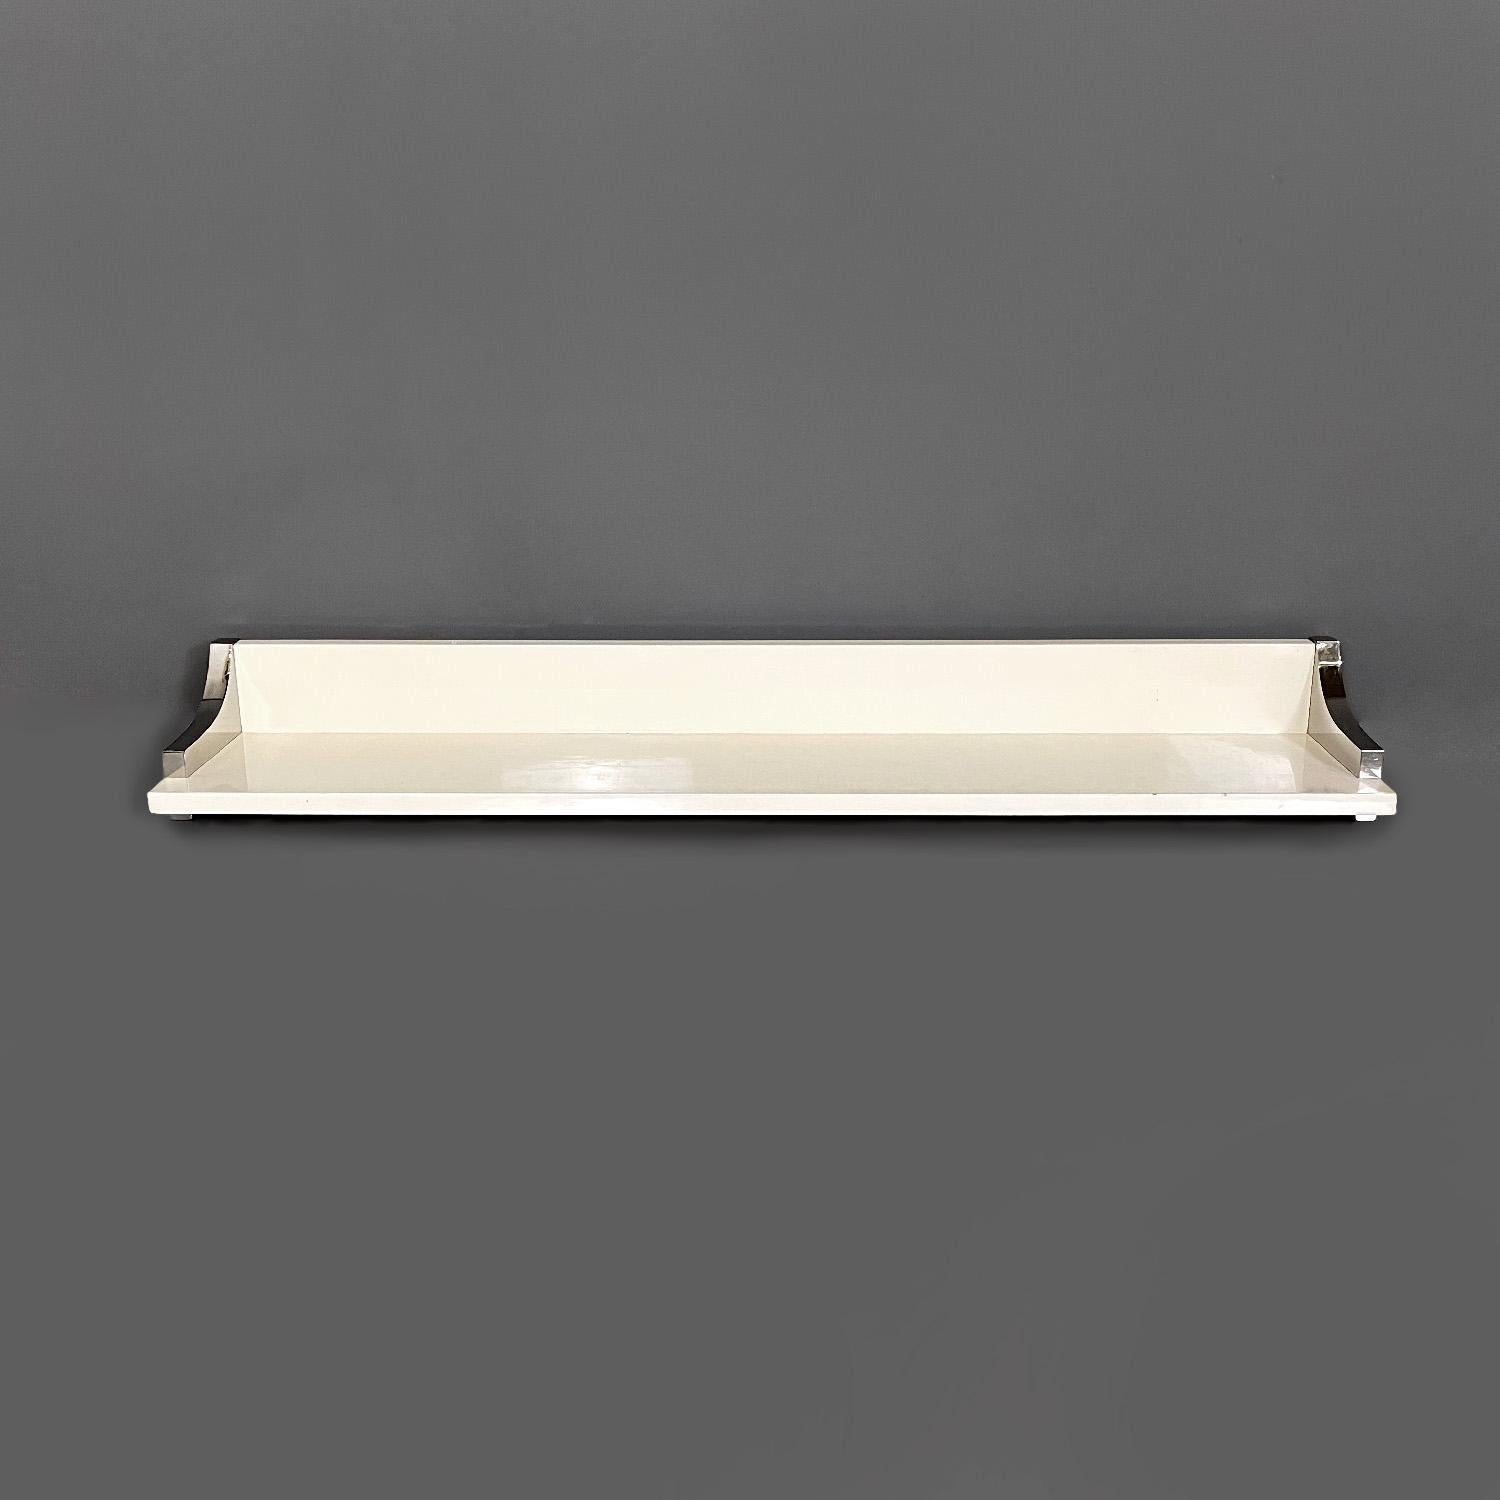 Italian modern white lacquered wood and chromed metal shelf by D.I.D., 1980s
Rectangular shelf, the structure is in white lacquered wood with a glossy finish. On both sides there is a decorative chromed metal covering that follows the trapezoidal